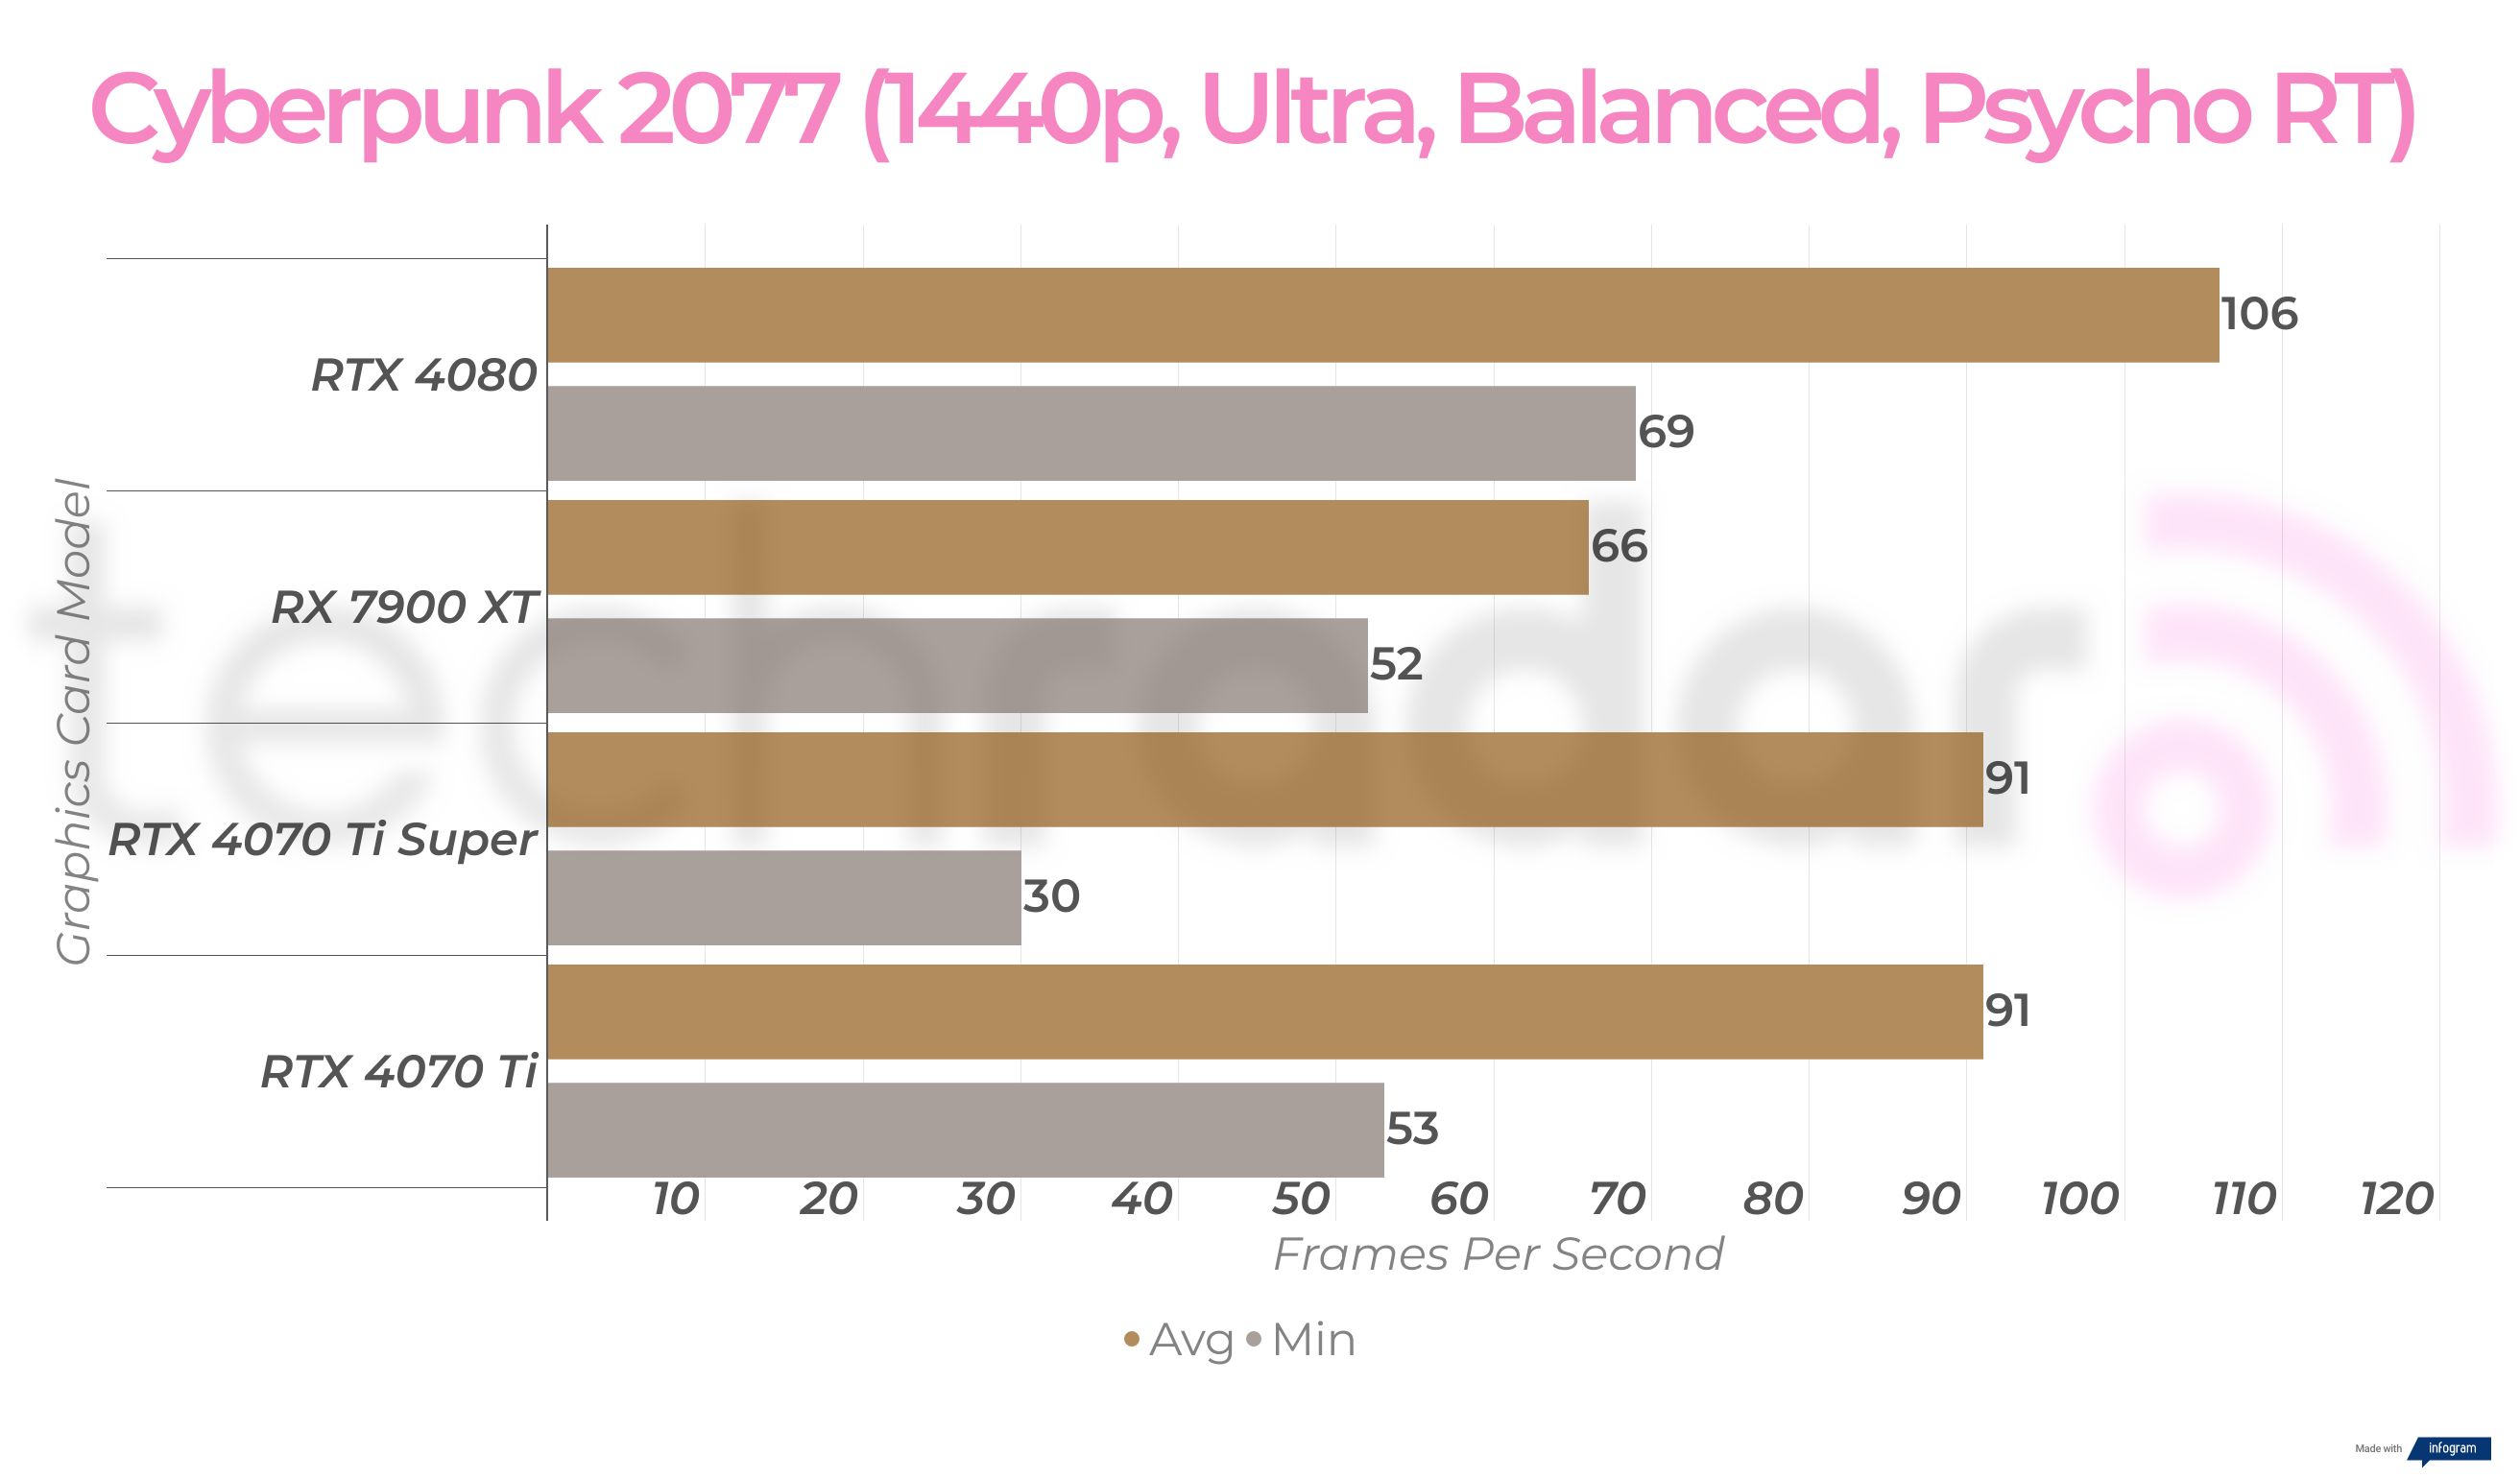 1440p gaming benchmarks for the RTX 4070 Ti Super